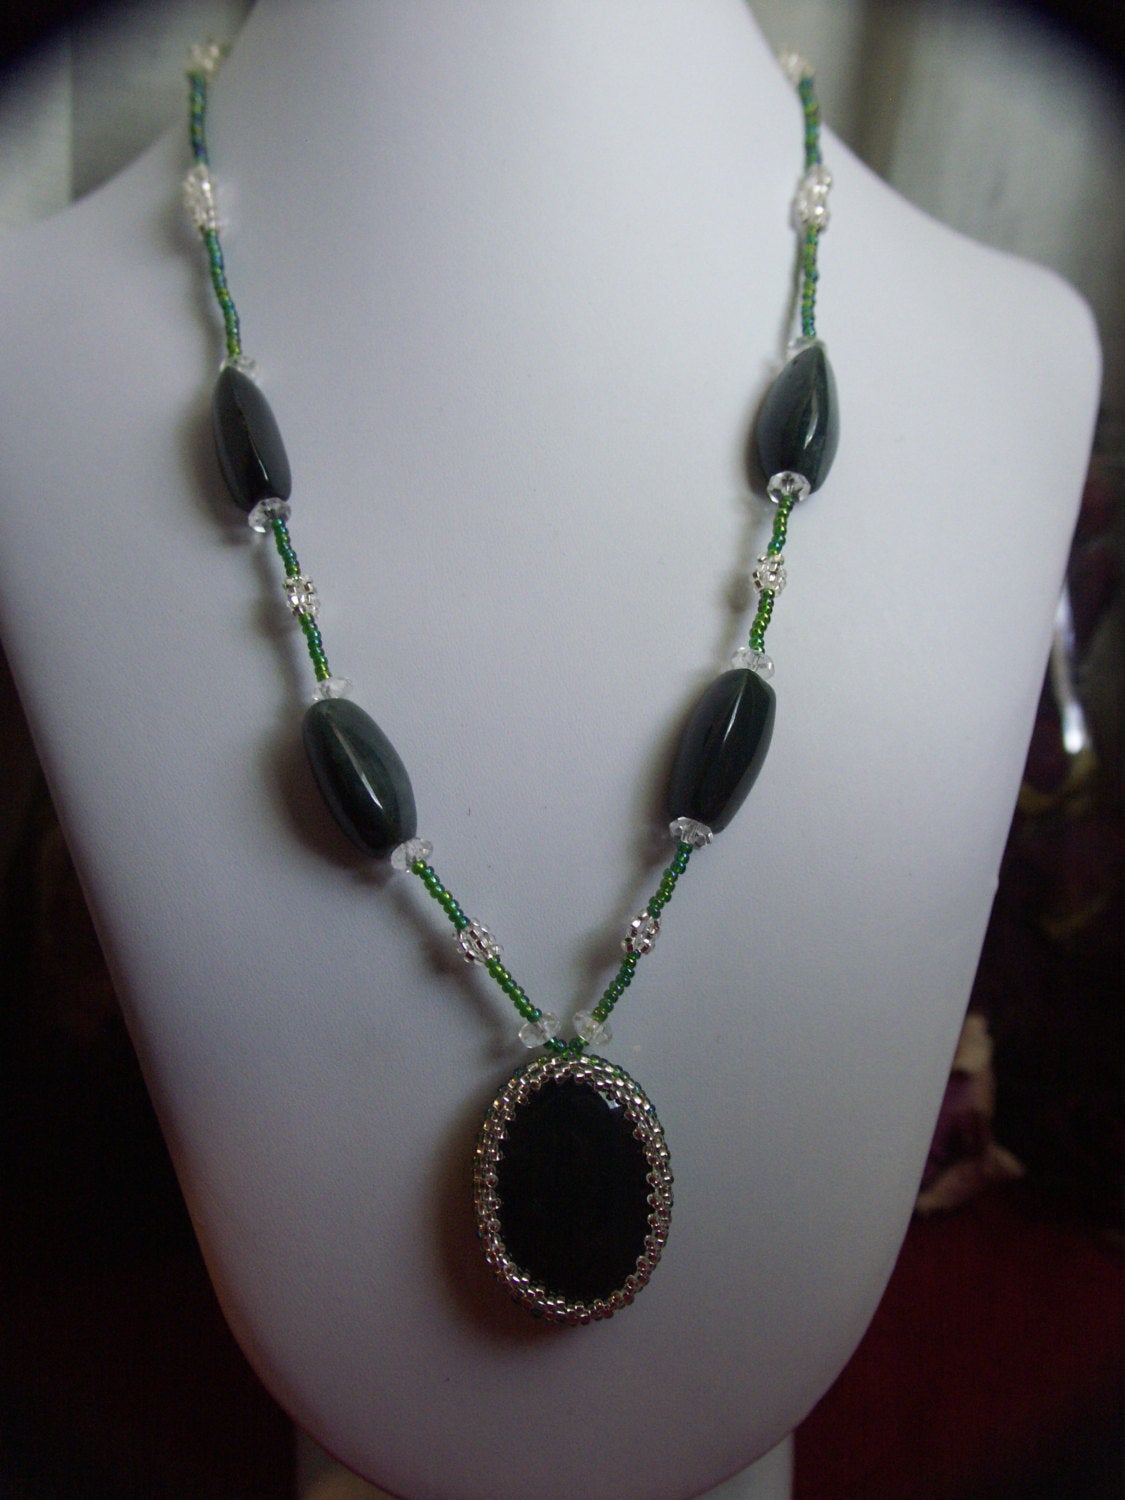 Green Agate and Quartz Necklace - One-of-a-Kind